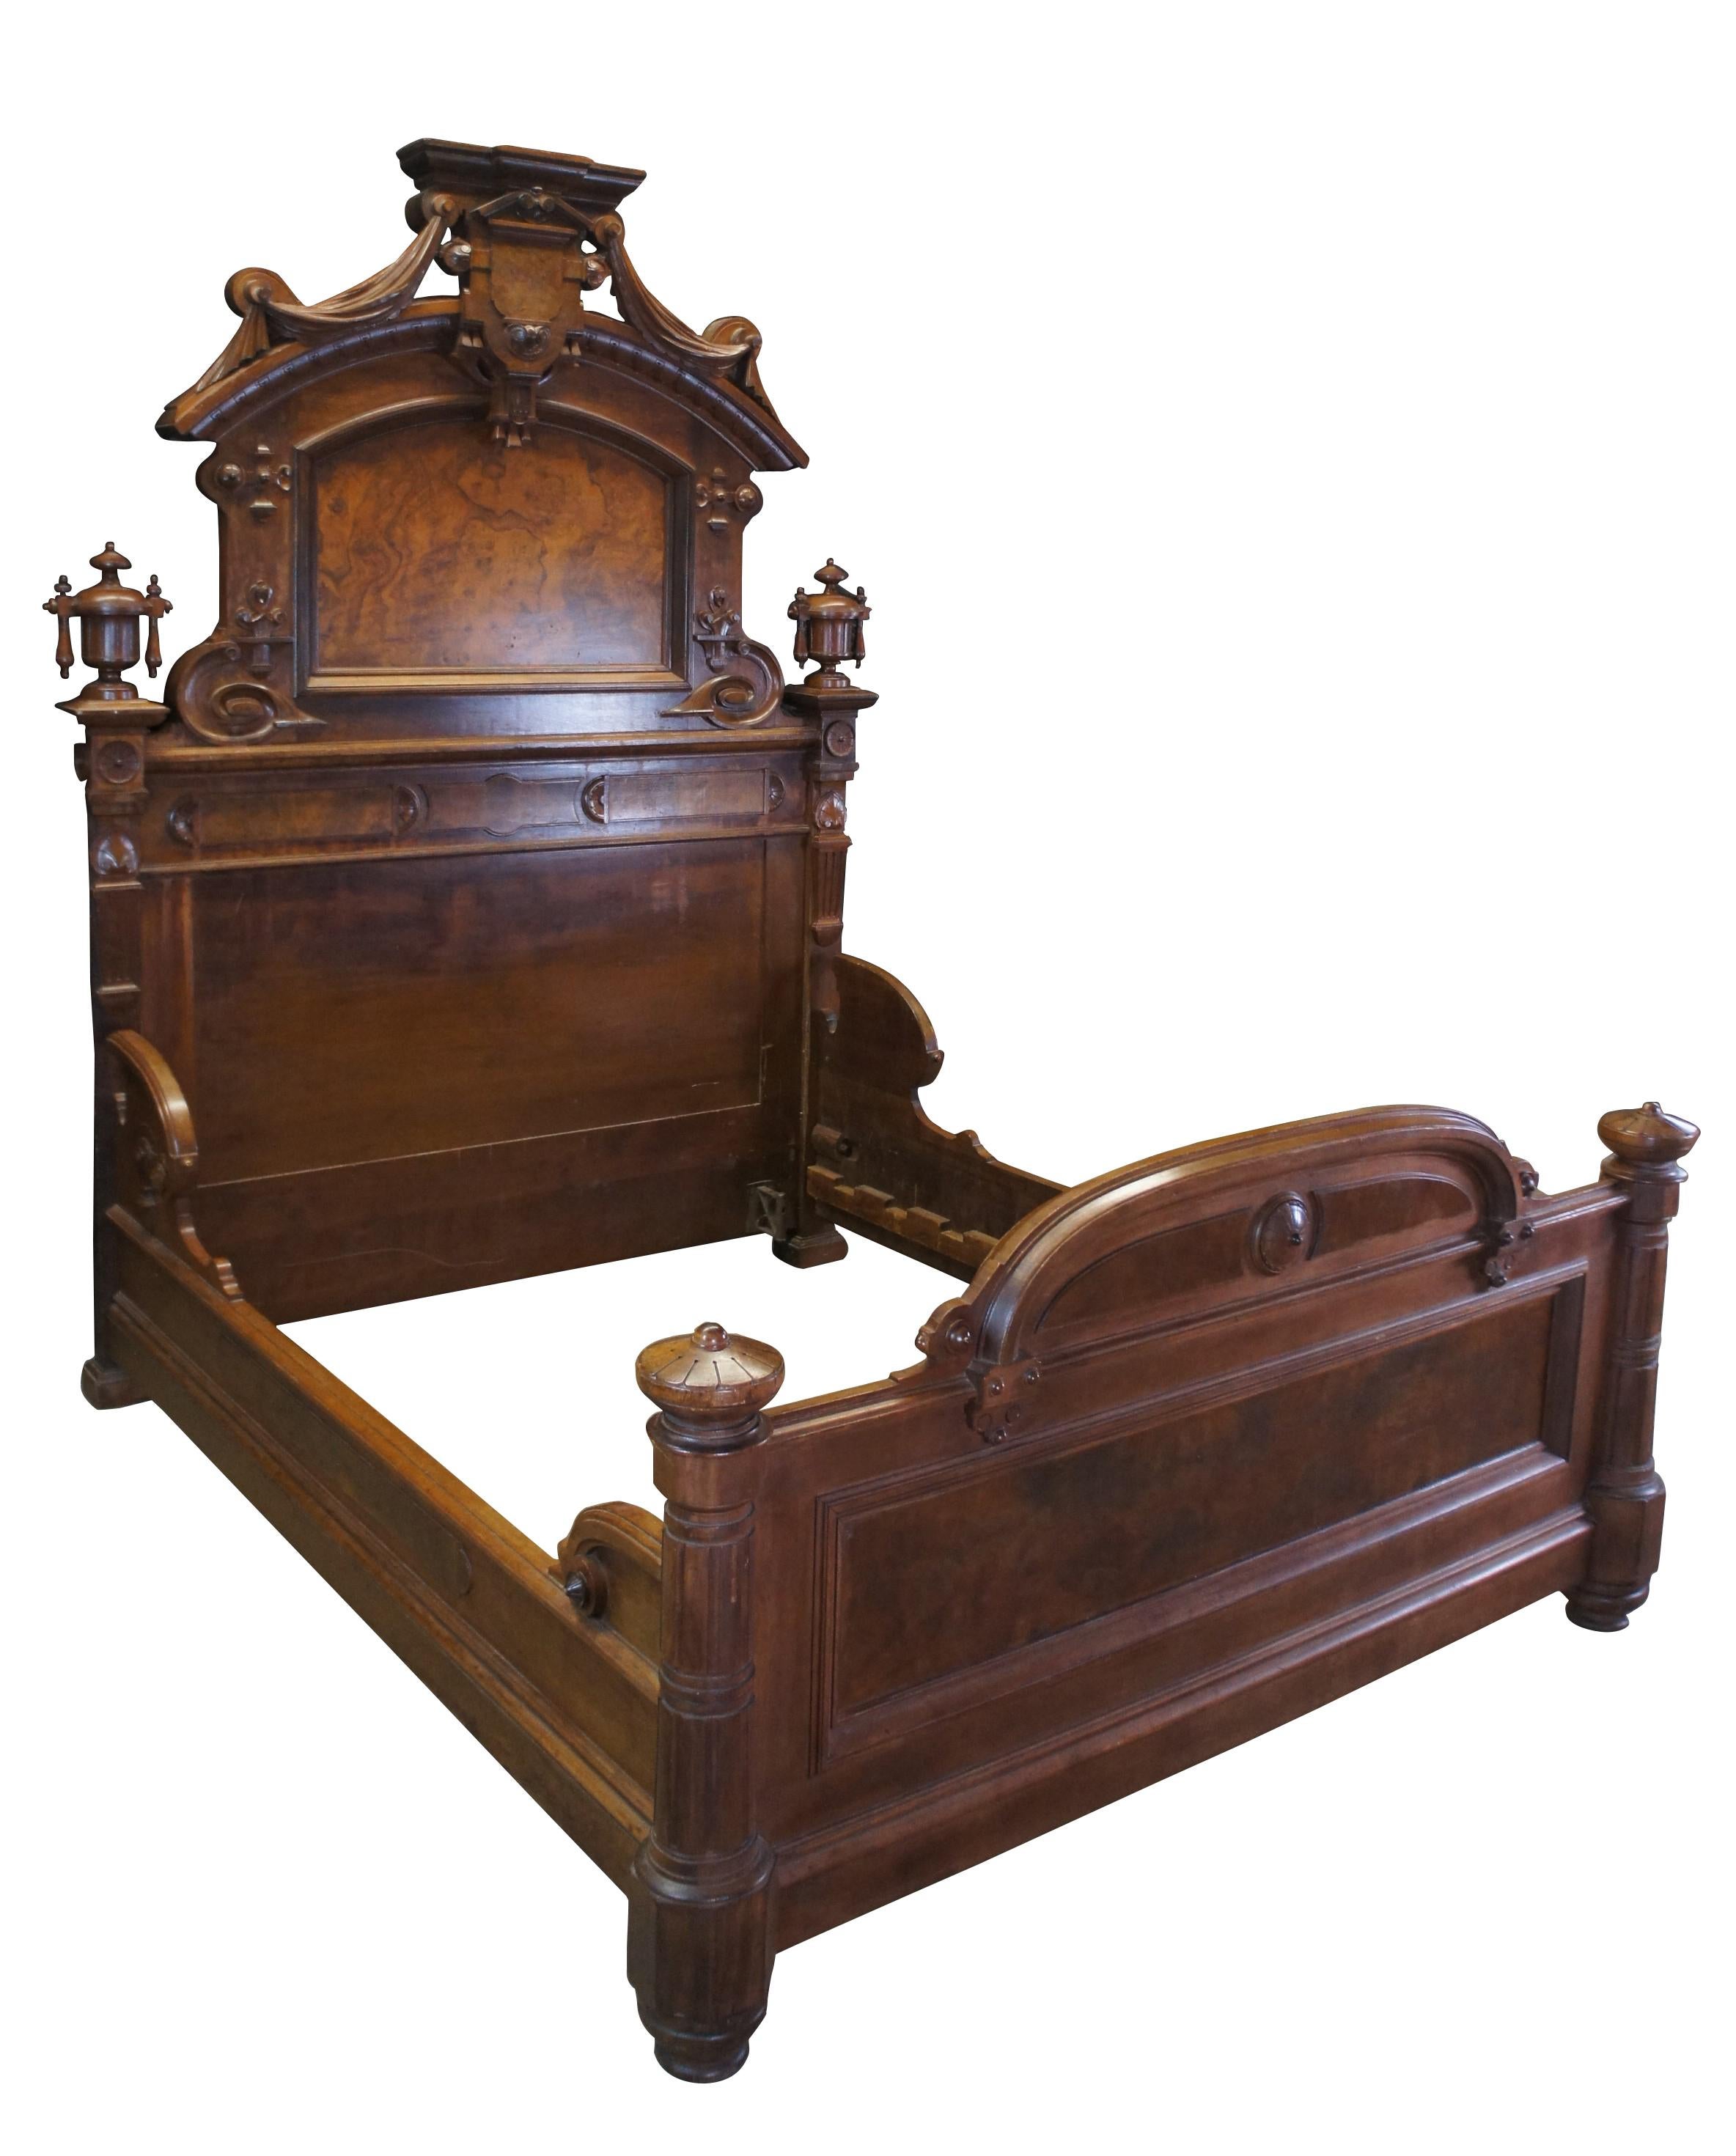 Mid 19th Century Victorian Eastlake walnut burl Lincoln style carved bed. Features a high back with burled panels, carved trophy finials, acorns, and Neoclassical style crown central shield / crest with ornate swags.


DIMENSIONS

91